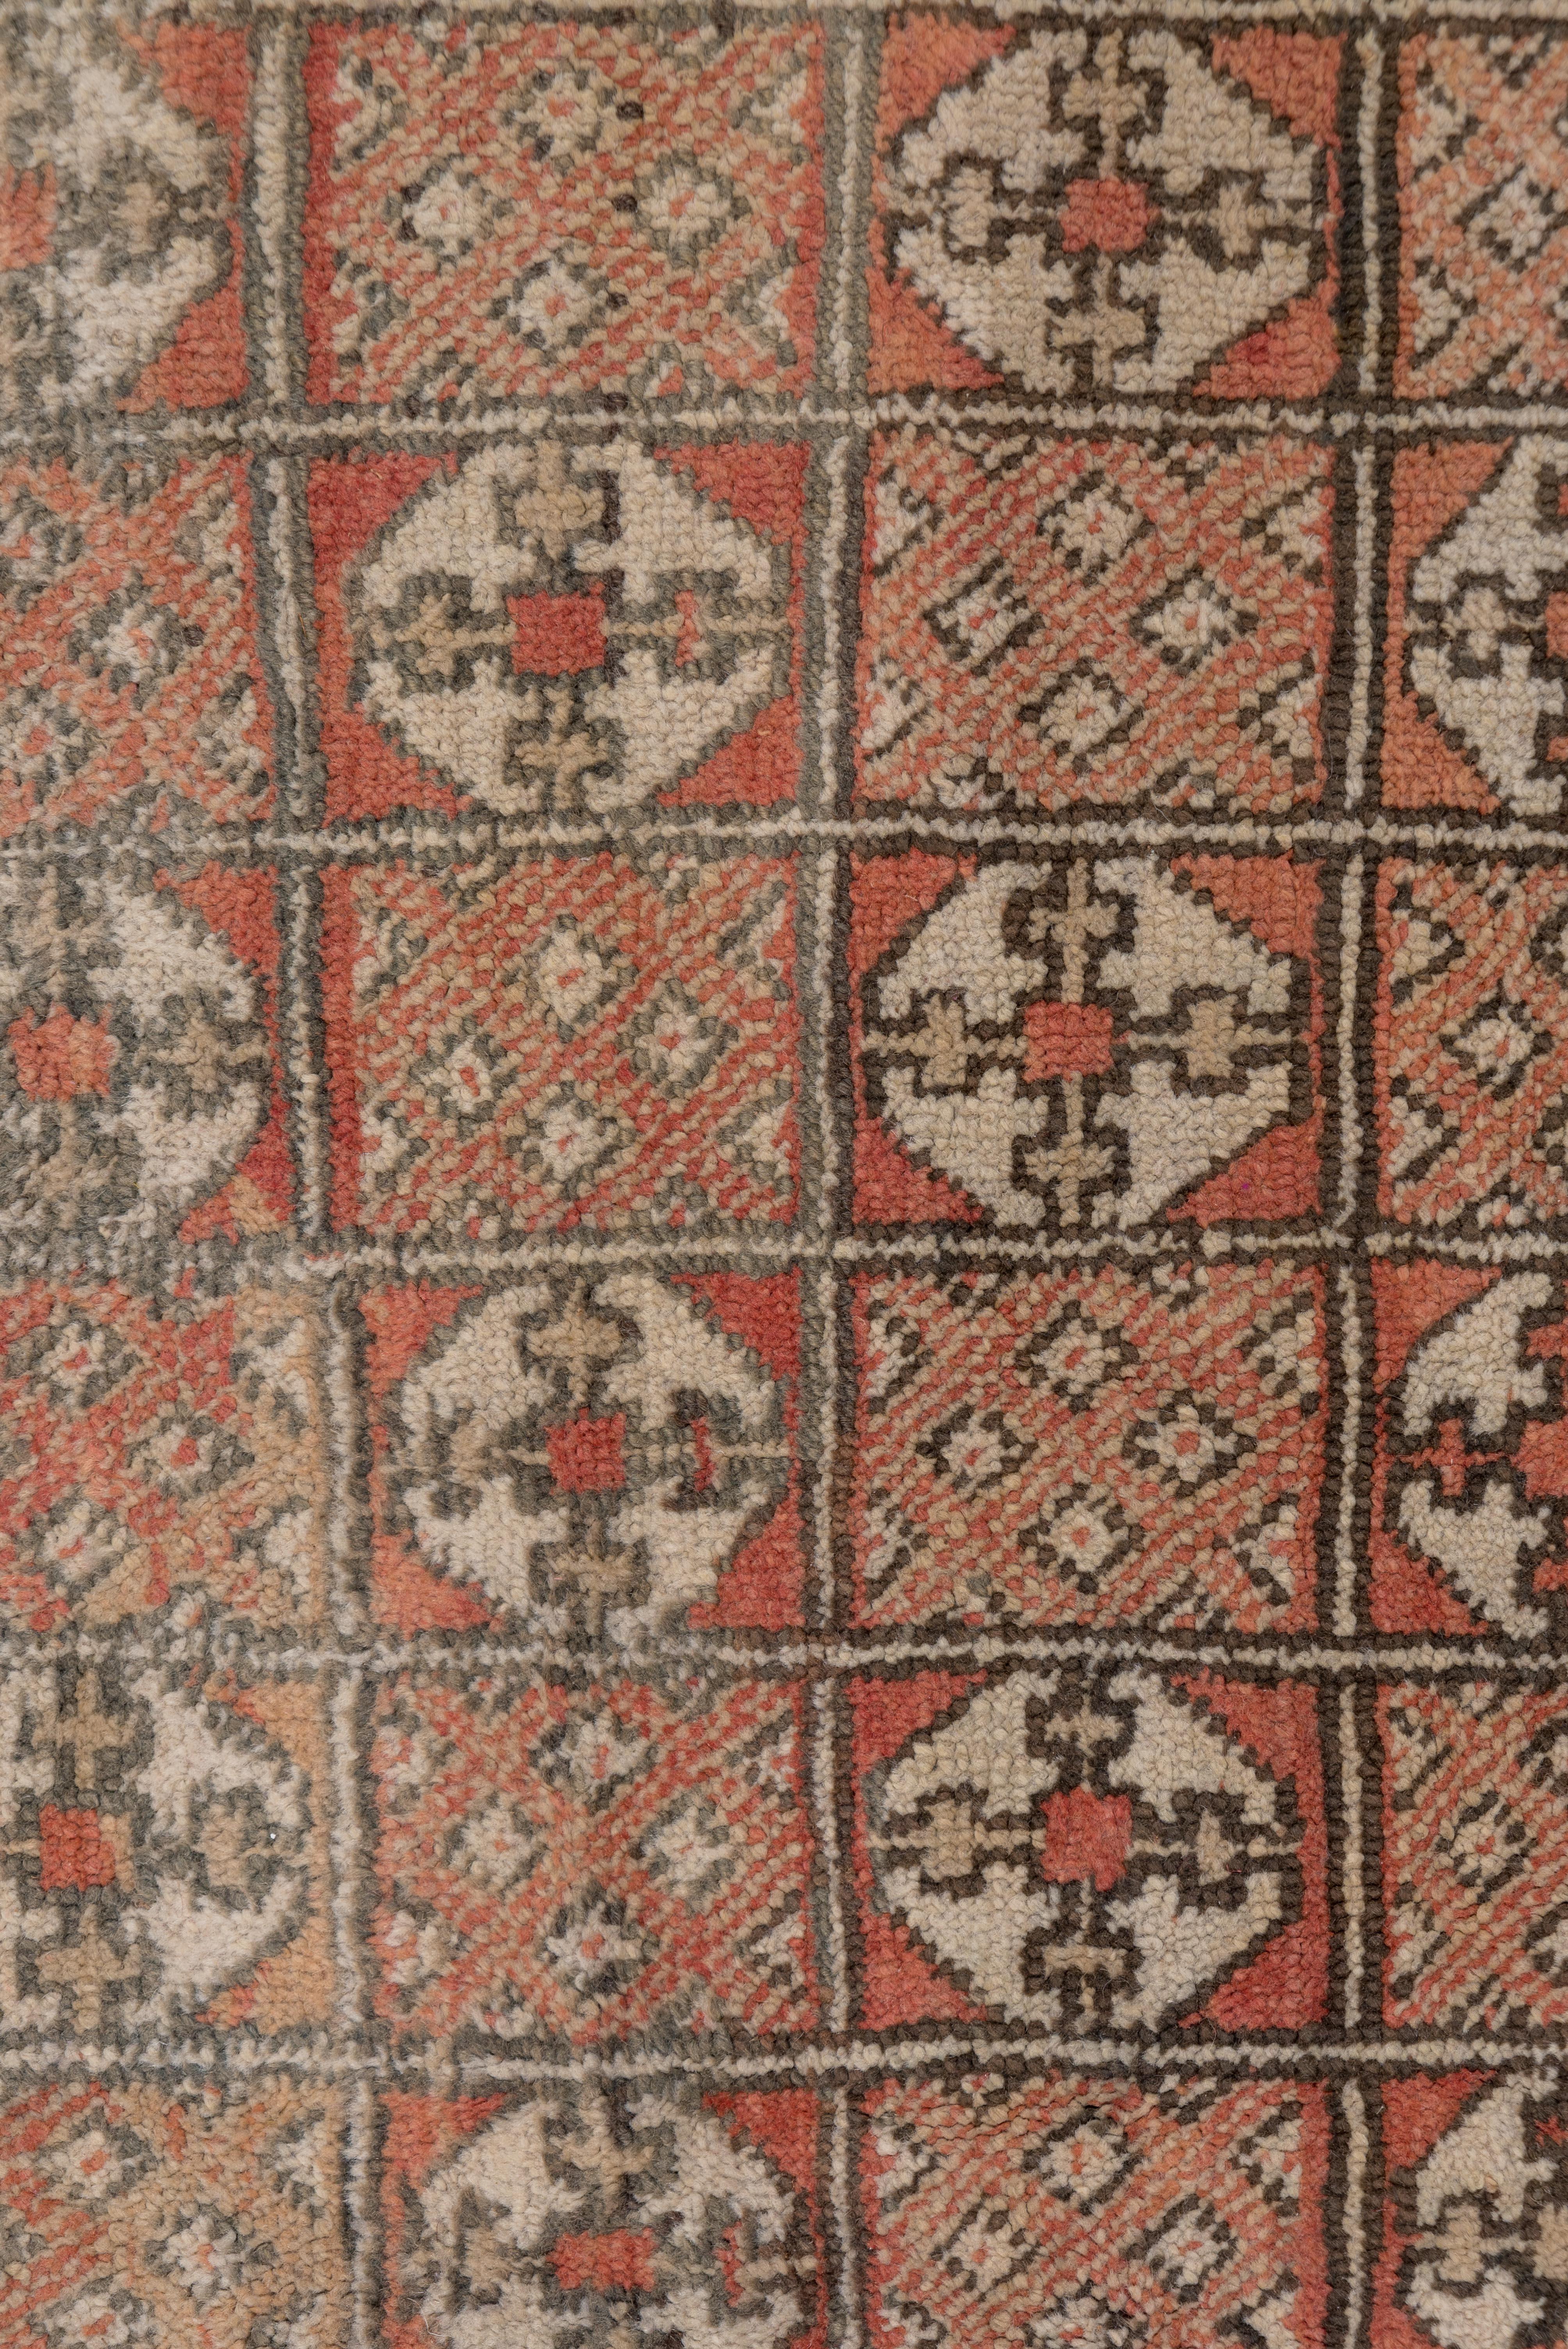 Diamond Patterns on Moroccan Village Rug In Good Condition For Sale In New York, NY